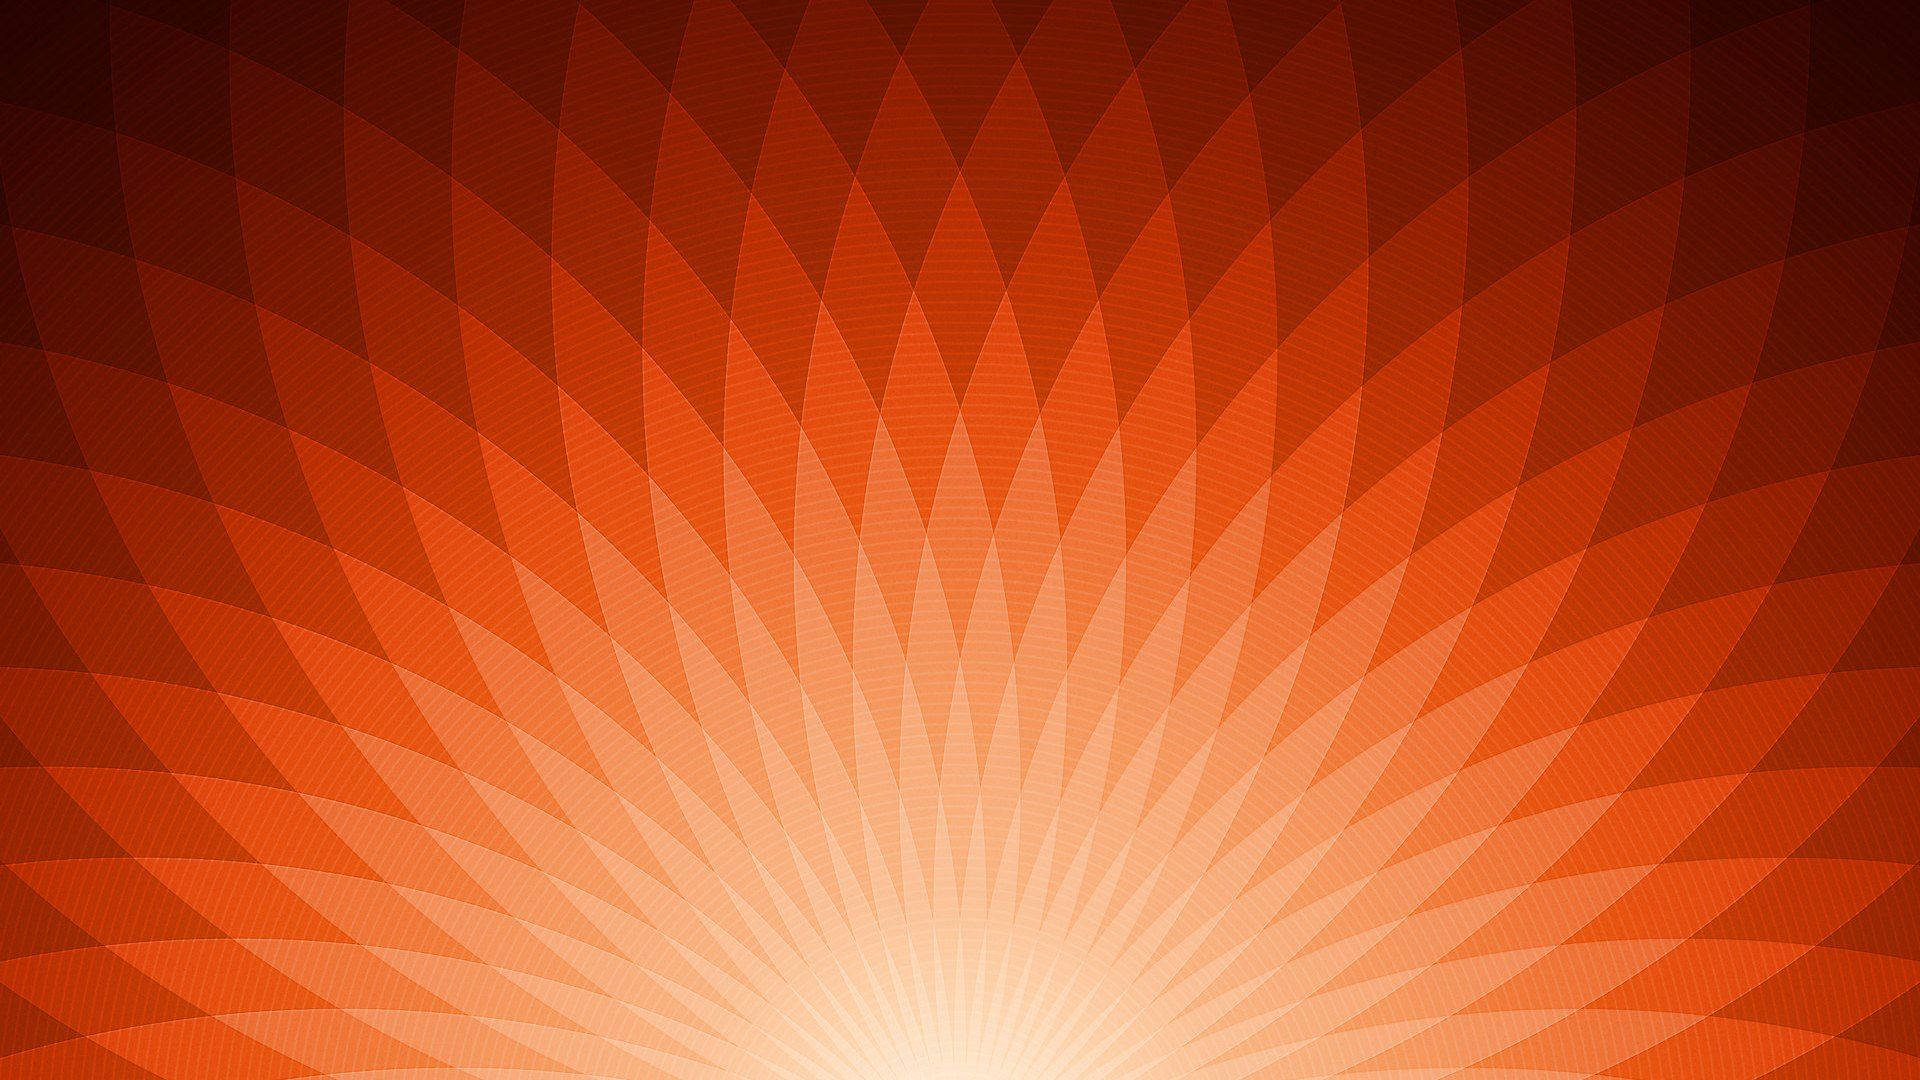 Light burst abstract red background wallpaper.